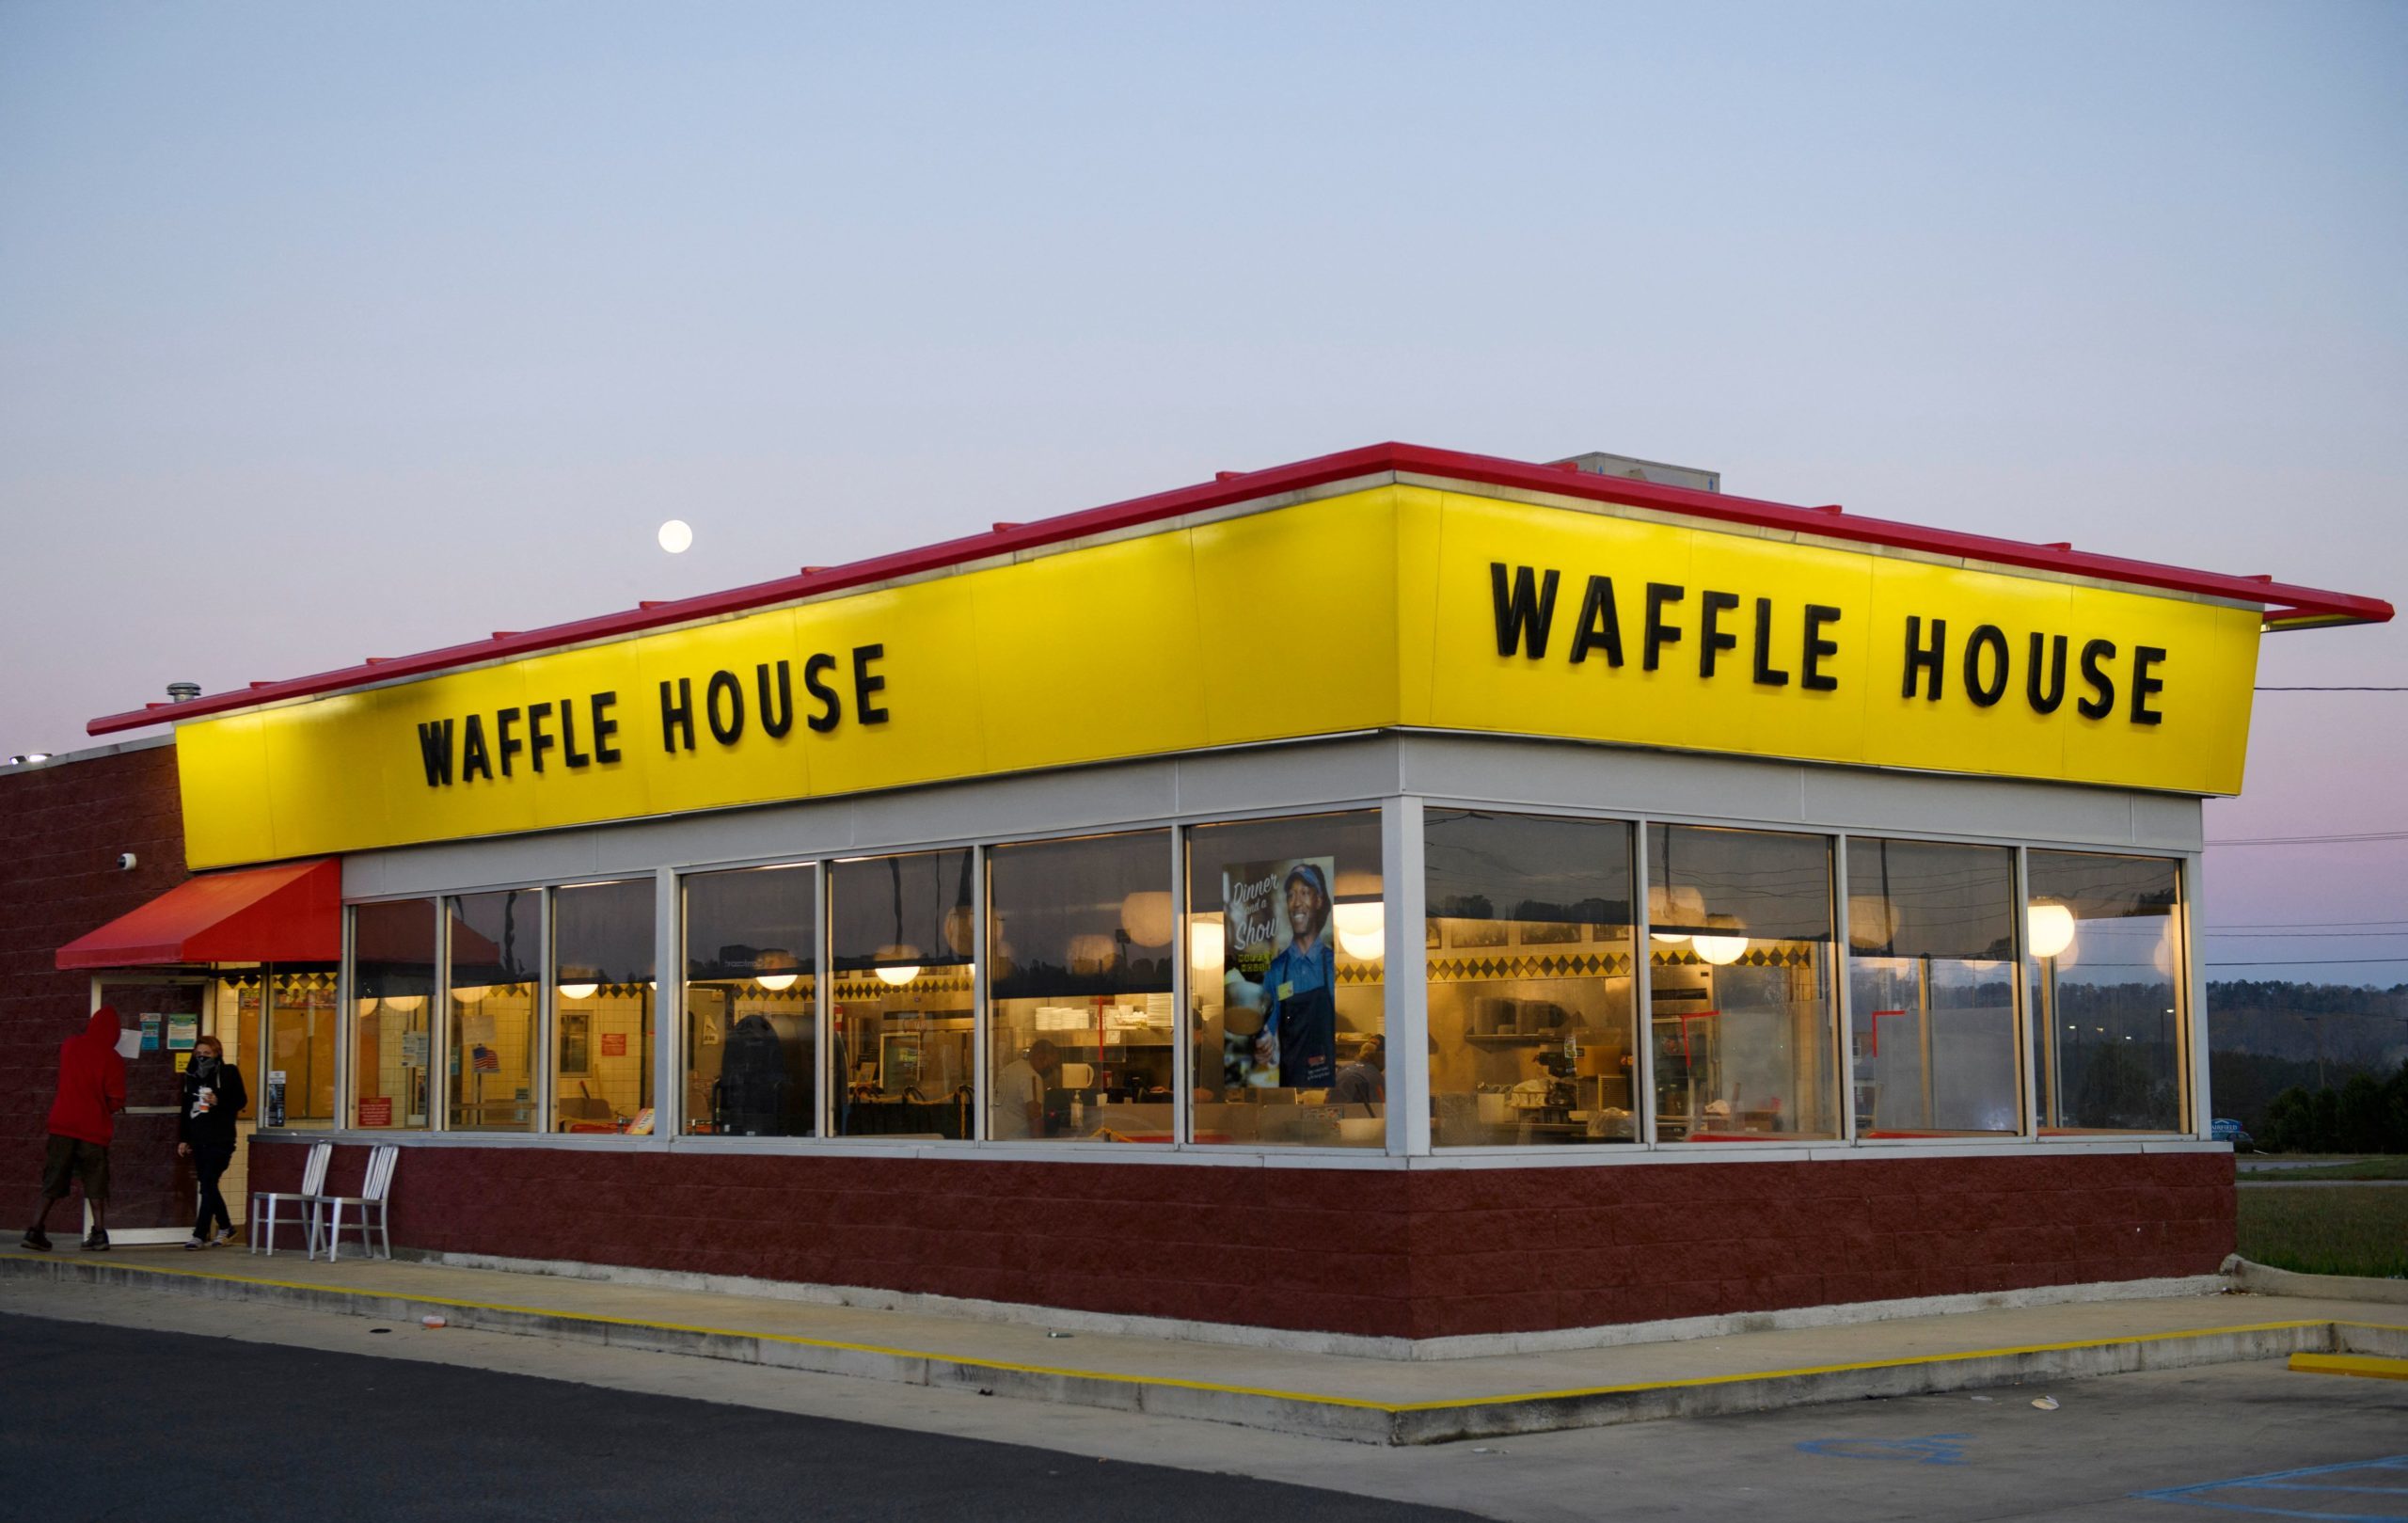 The Gospel According to Waffle House